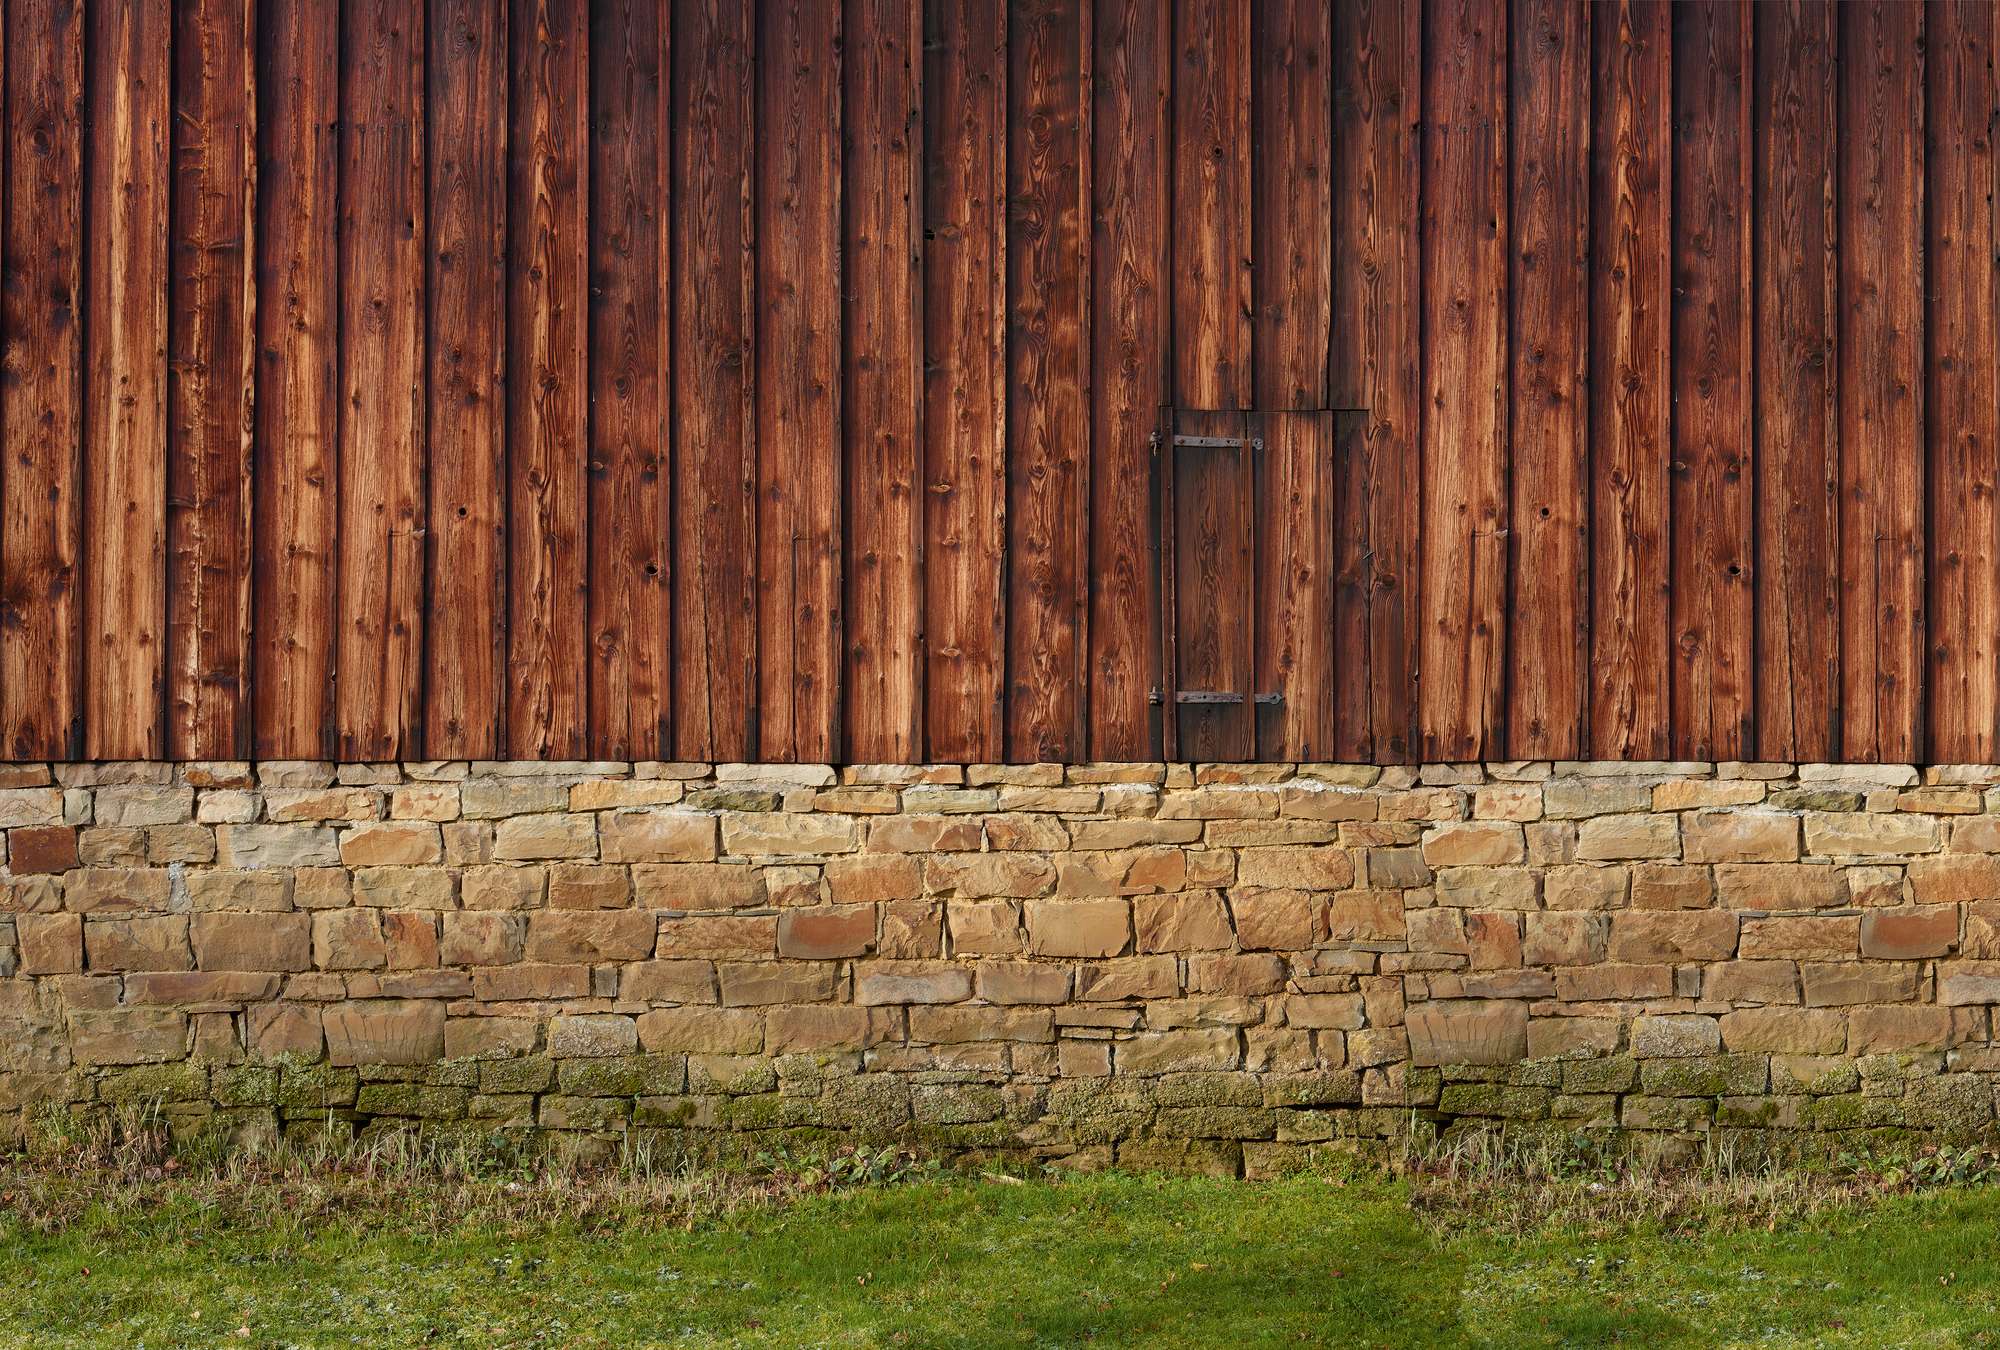             Photo wallpaper with wooden facade and natural stone wall
        